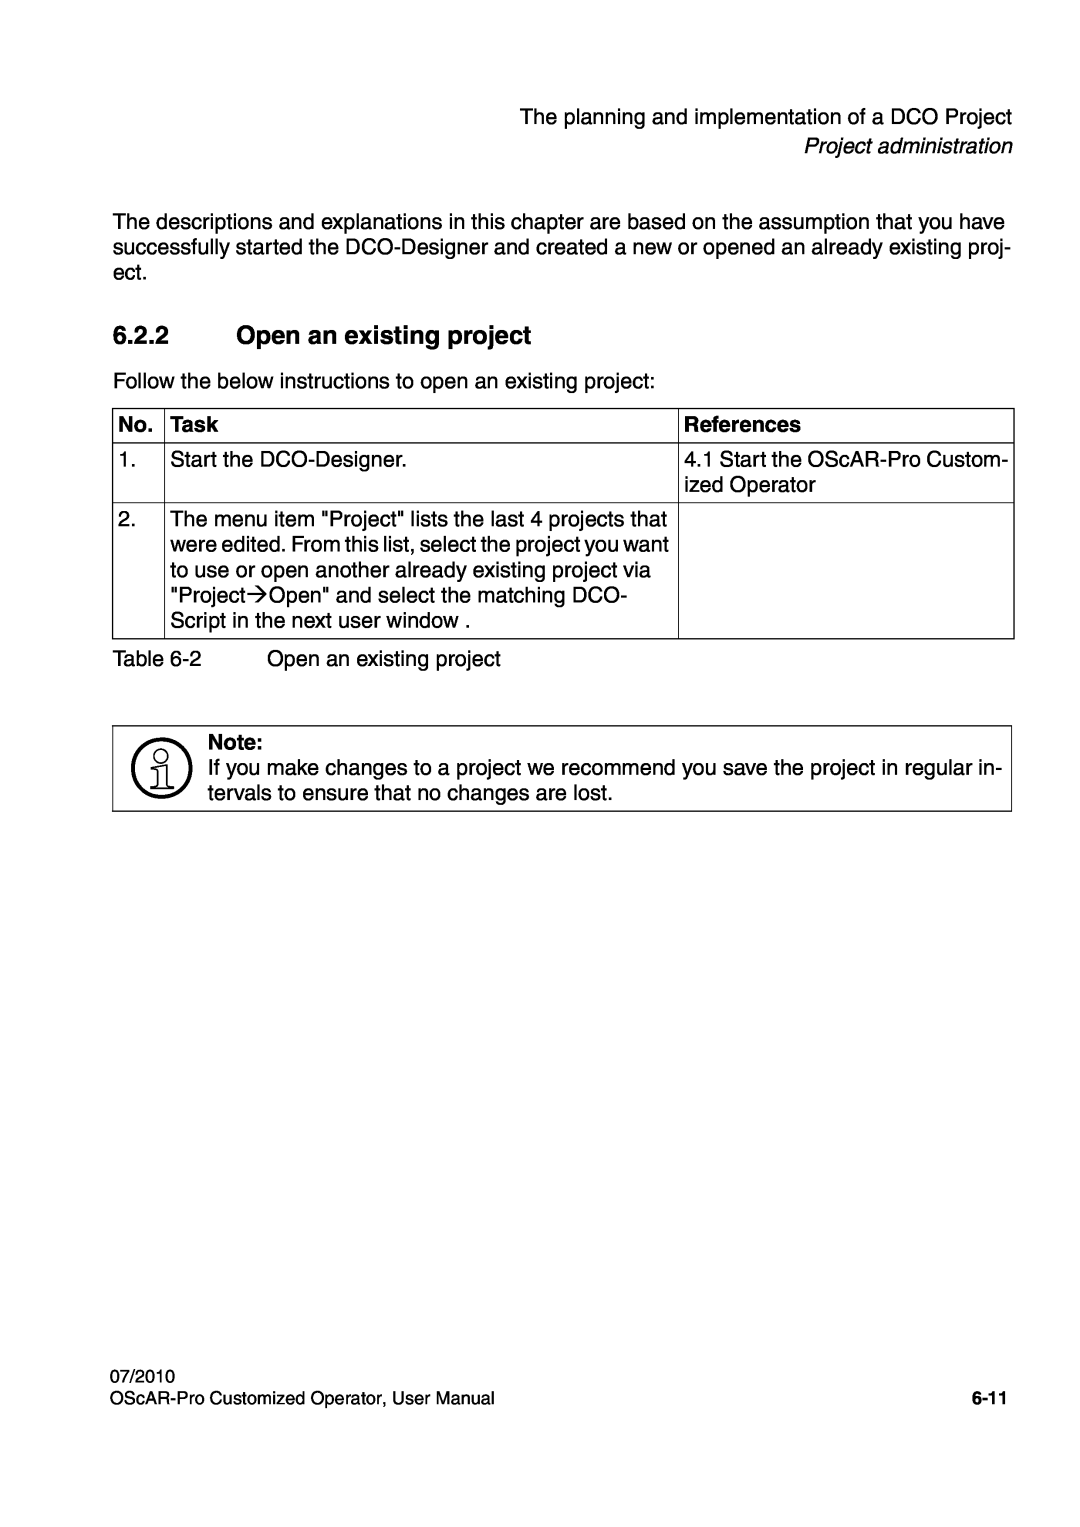 Siemens A31003-51730-U103-7619 user manual 6.2.2Open an existing project, Project administration, Task, References 